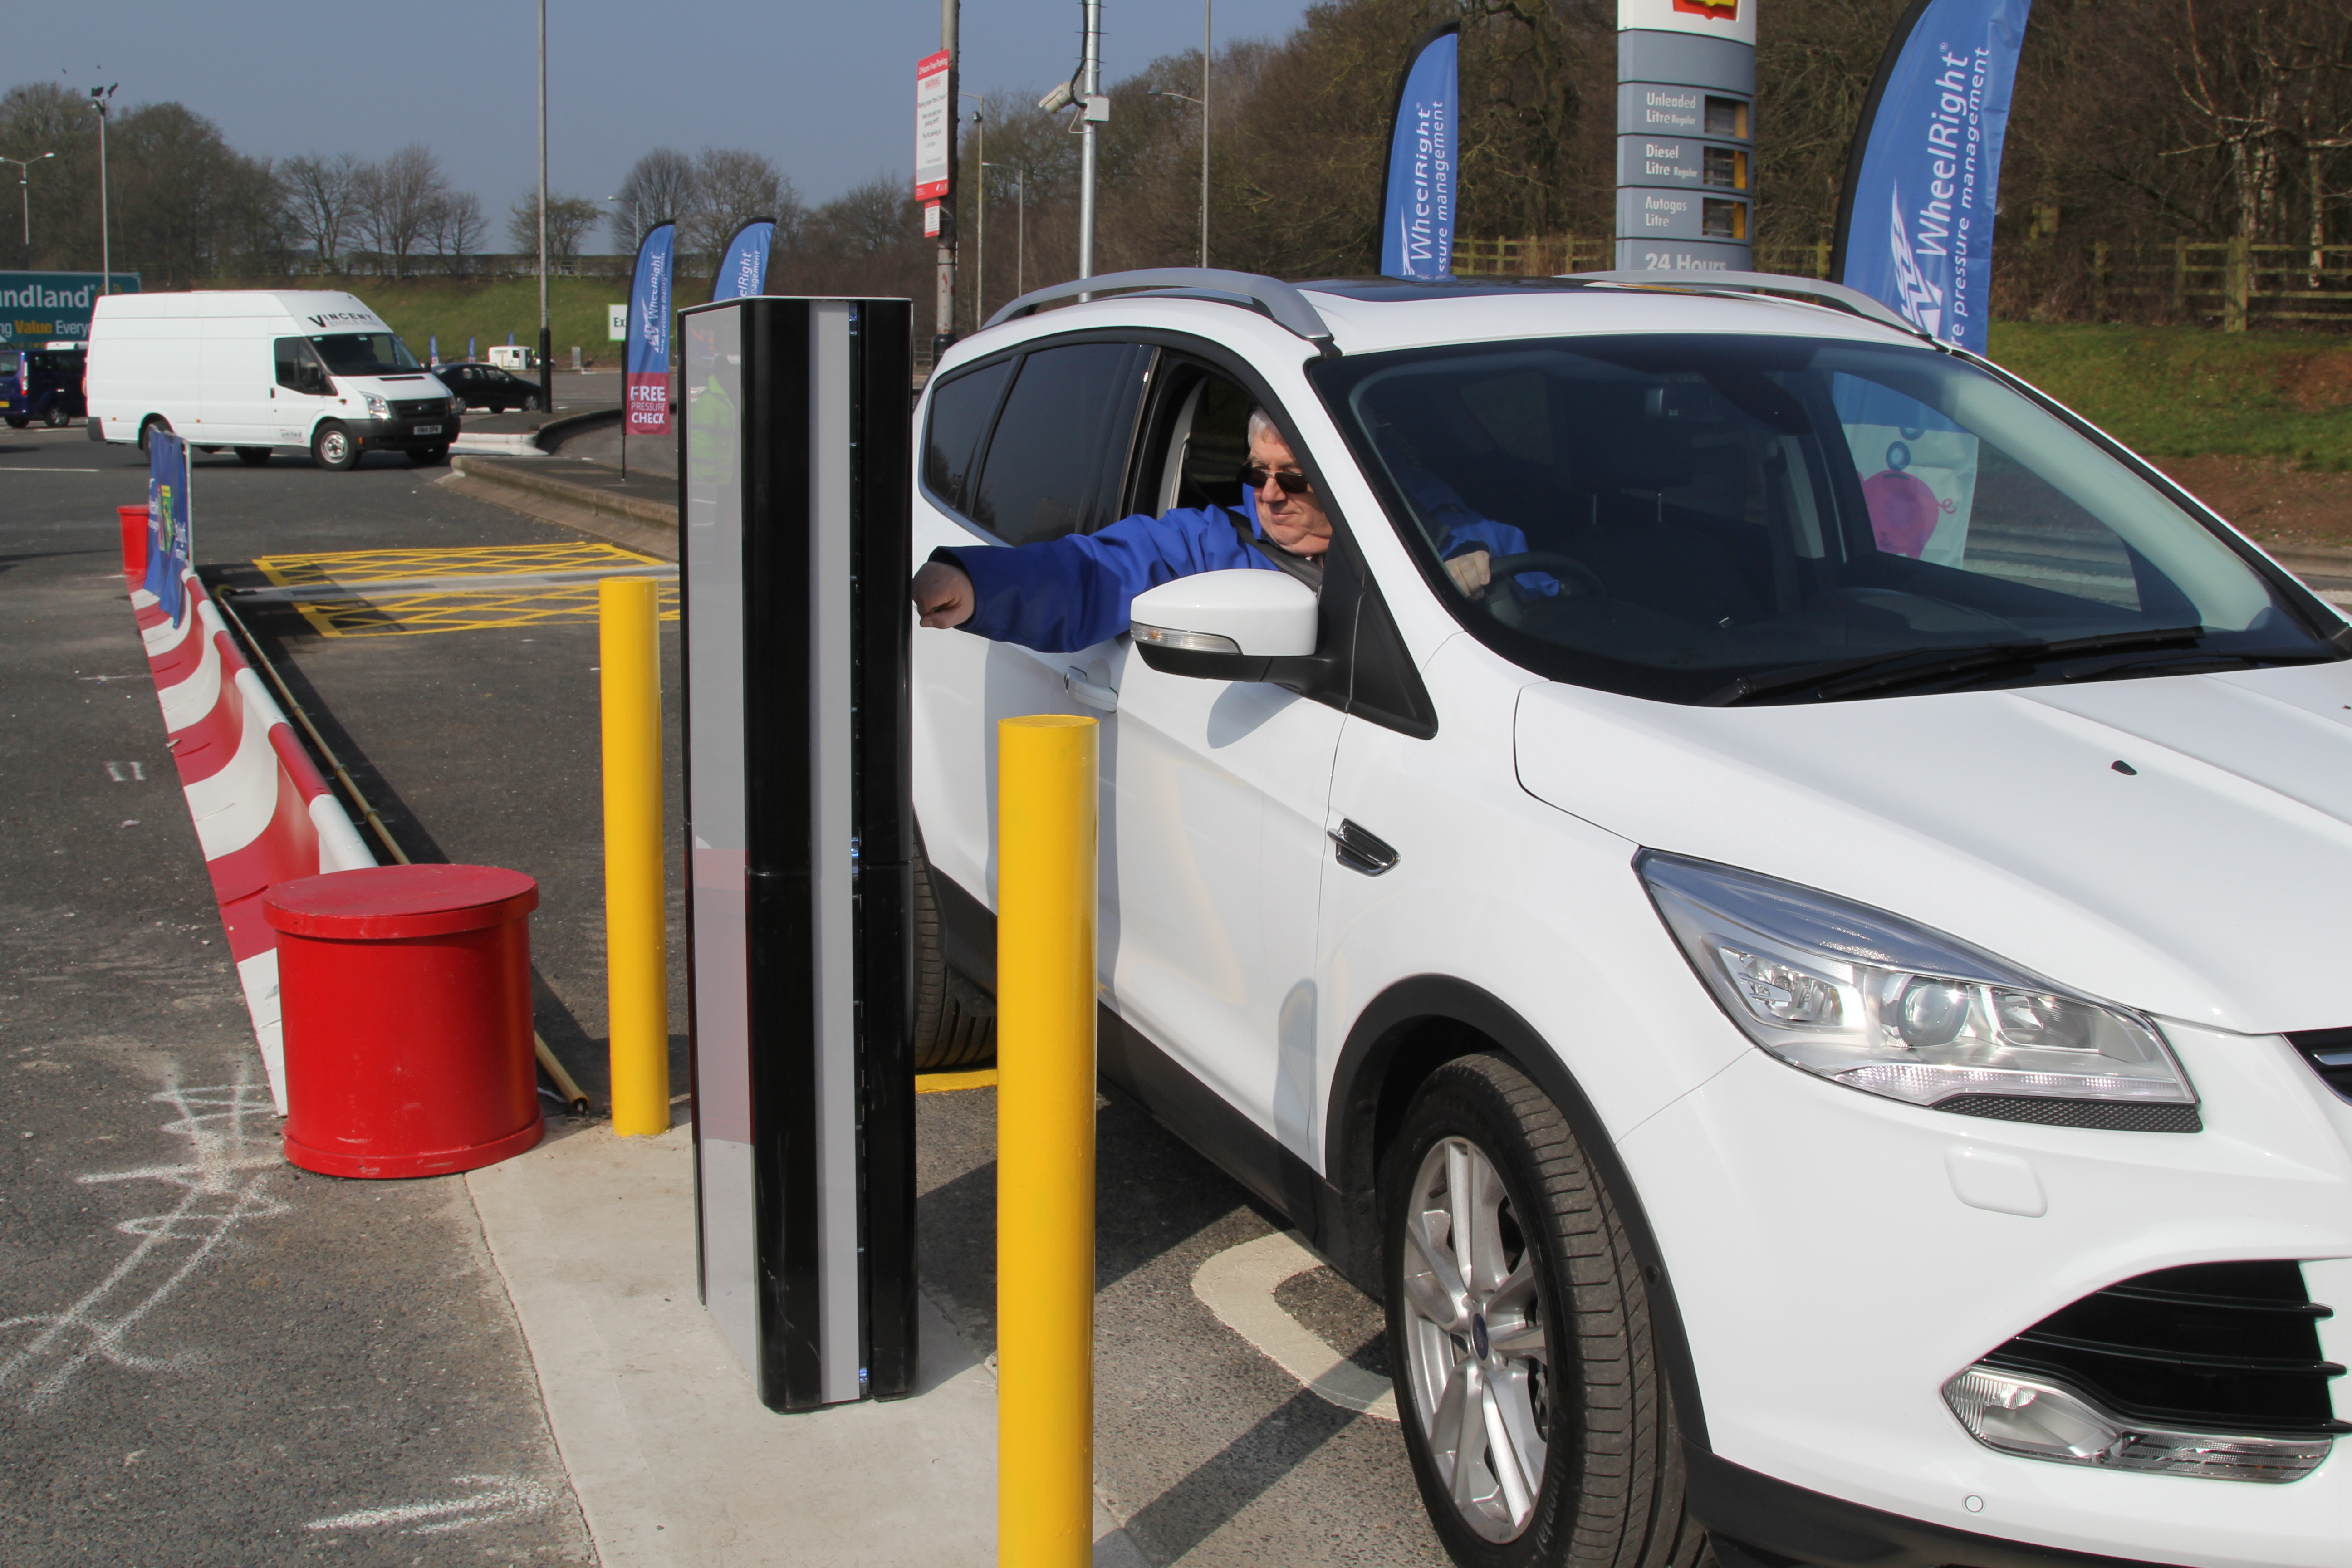 Does WheelRight offer national forecourt roll-out potential?